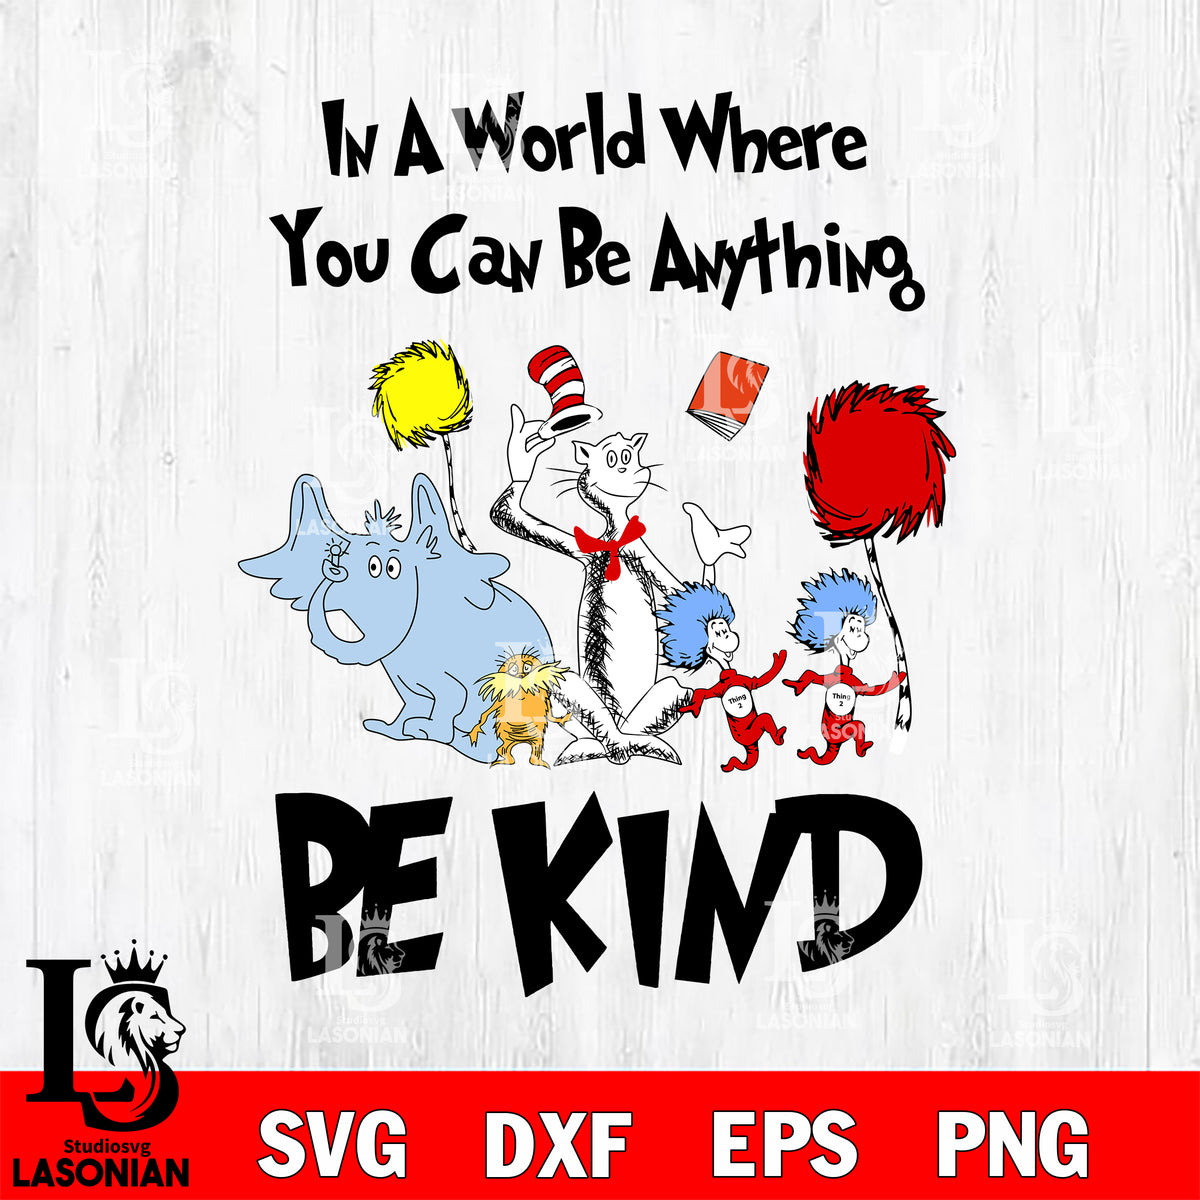 Be Kind Svg, Read Across America Svg, You Can Be Anything, in a world ...